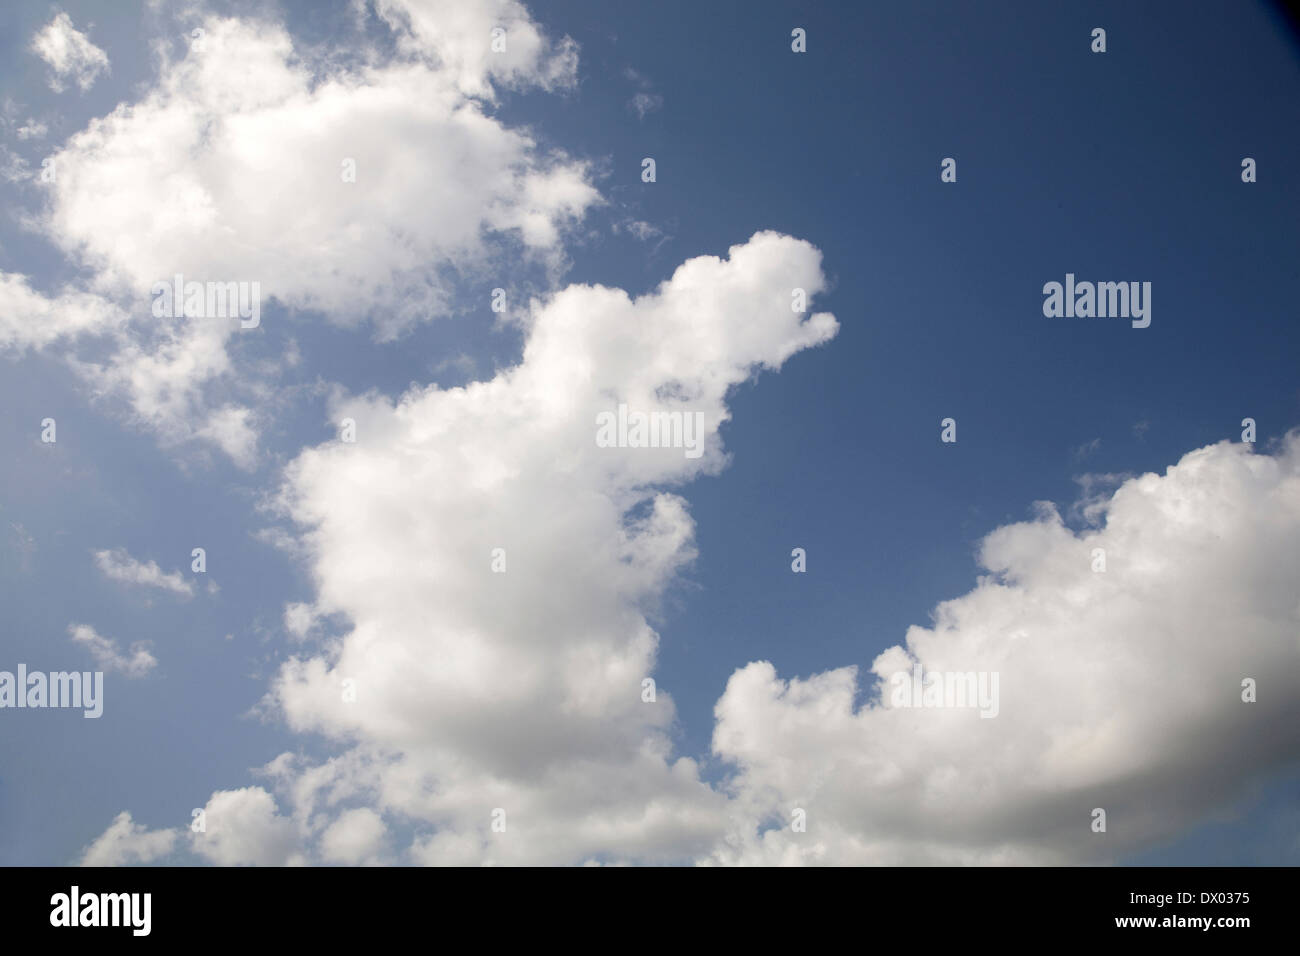 Blue sky with clouds Stock Photo